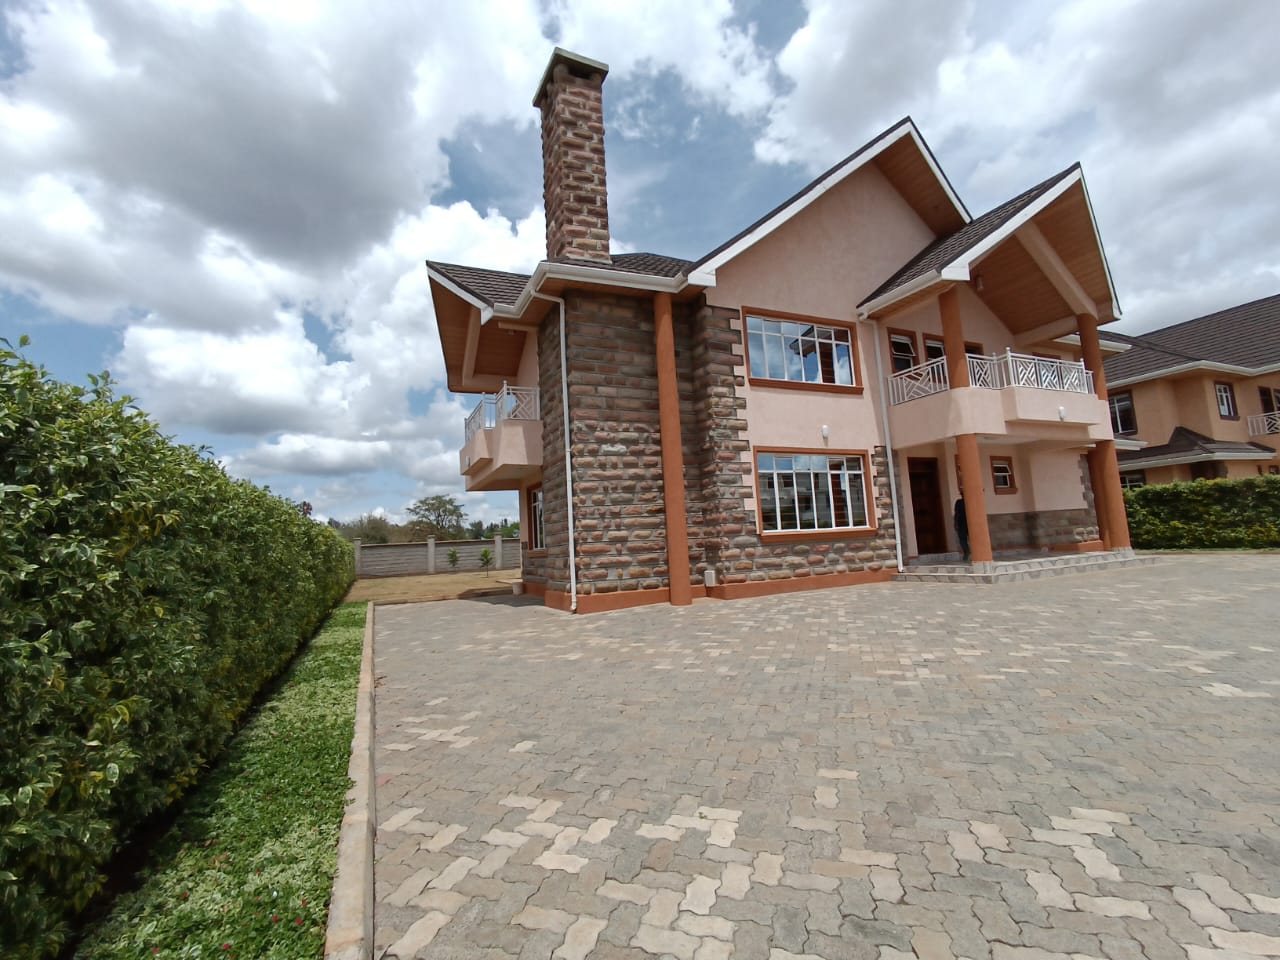 Brand new 4 bedrooms in kenyatta road 2km from thika road. Sitting on 1/4acre free hold. Selling price ksh39m Musilli Homes